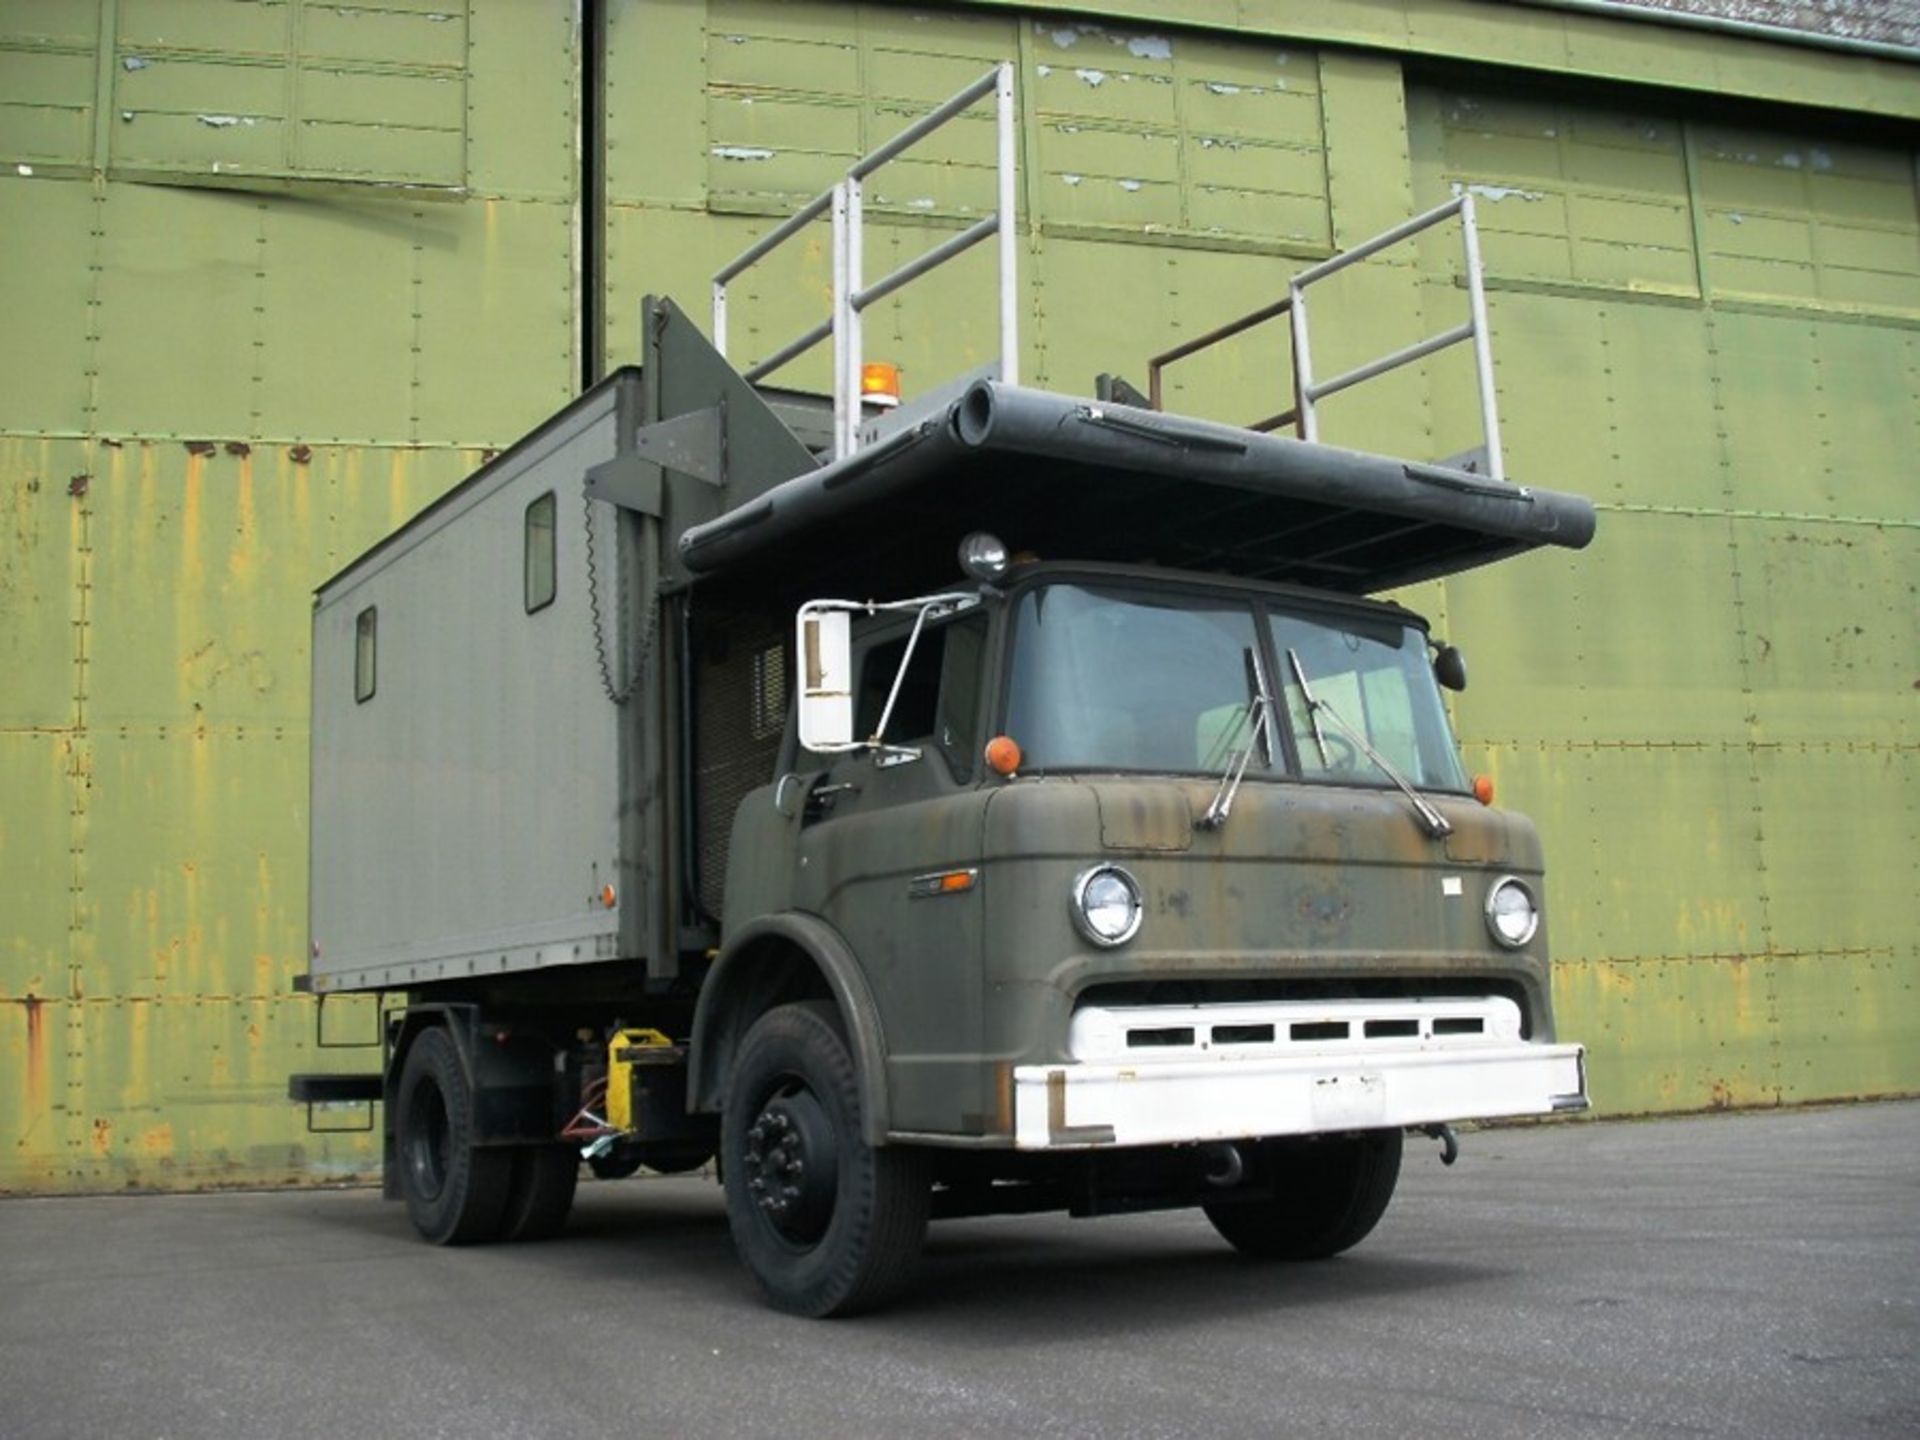 *Ford Model C8000, 4x2 LHD with Elevating body, Body elevates to 12ft platform swl 2000lbs.